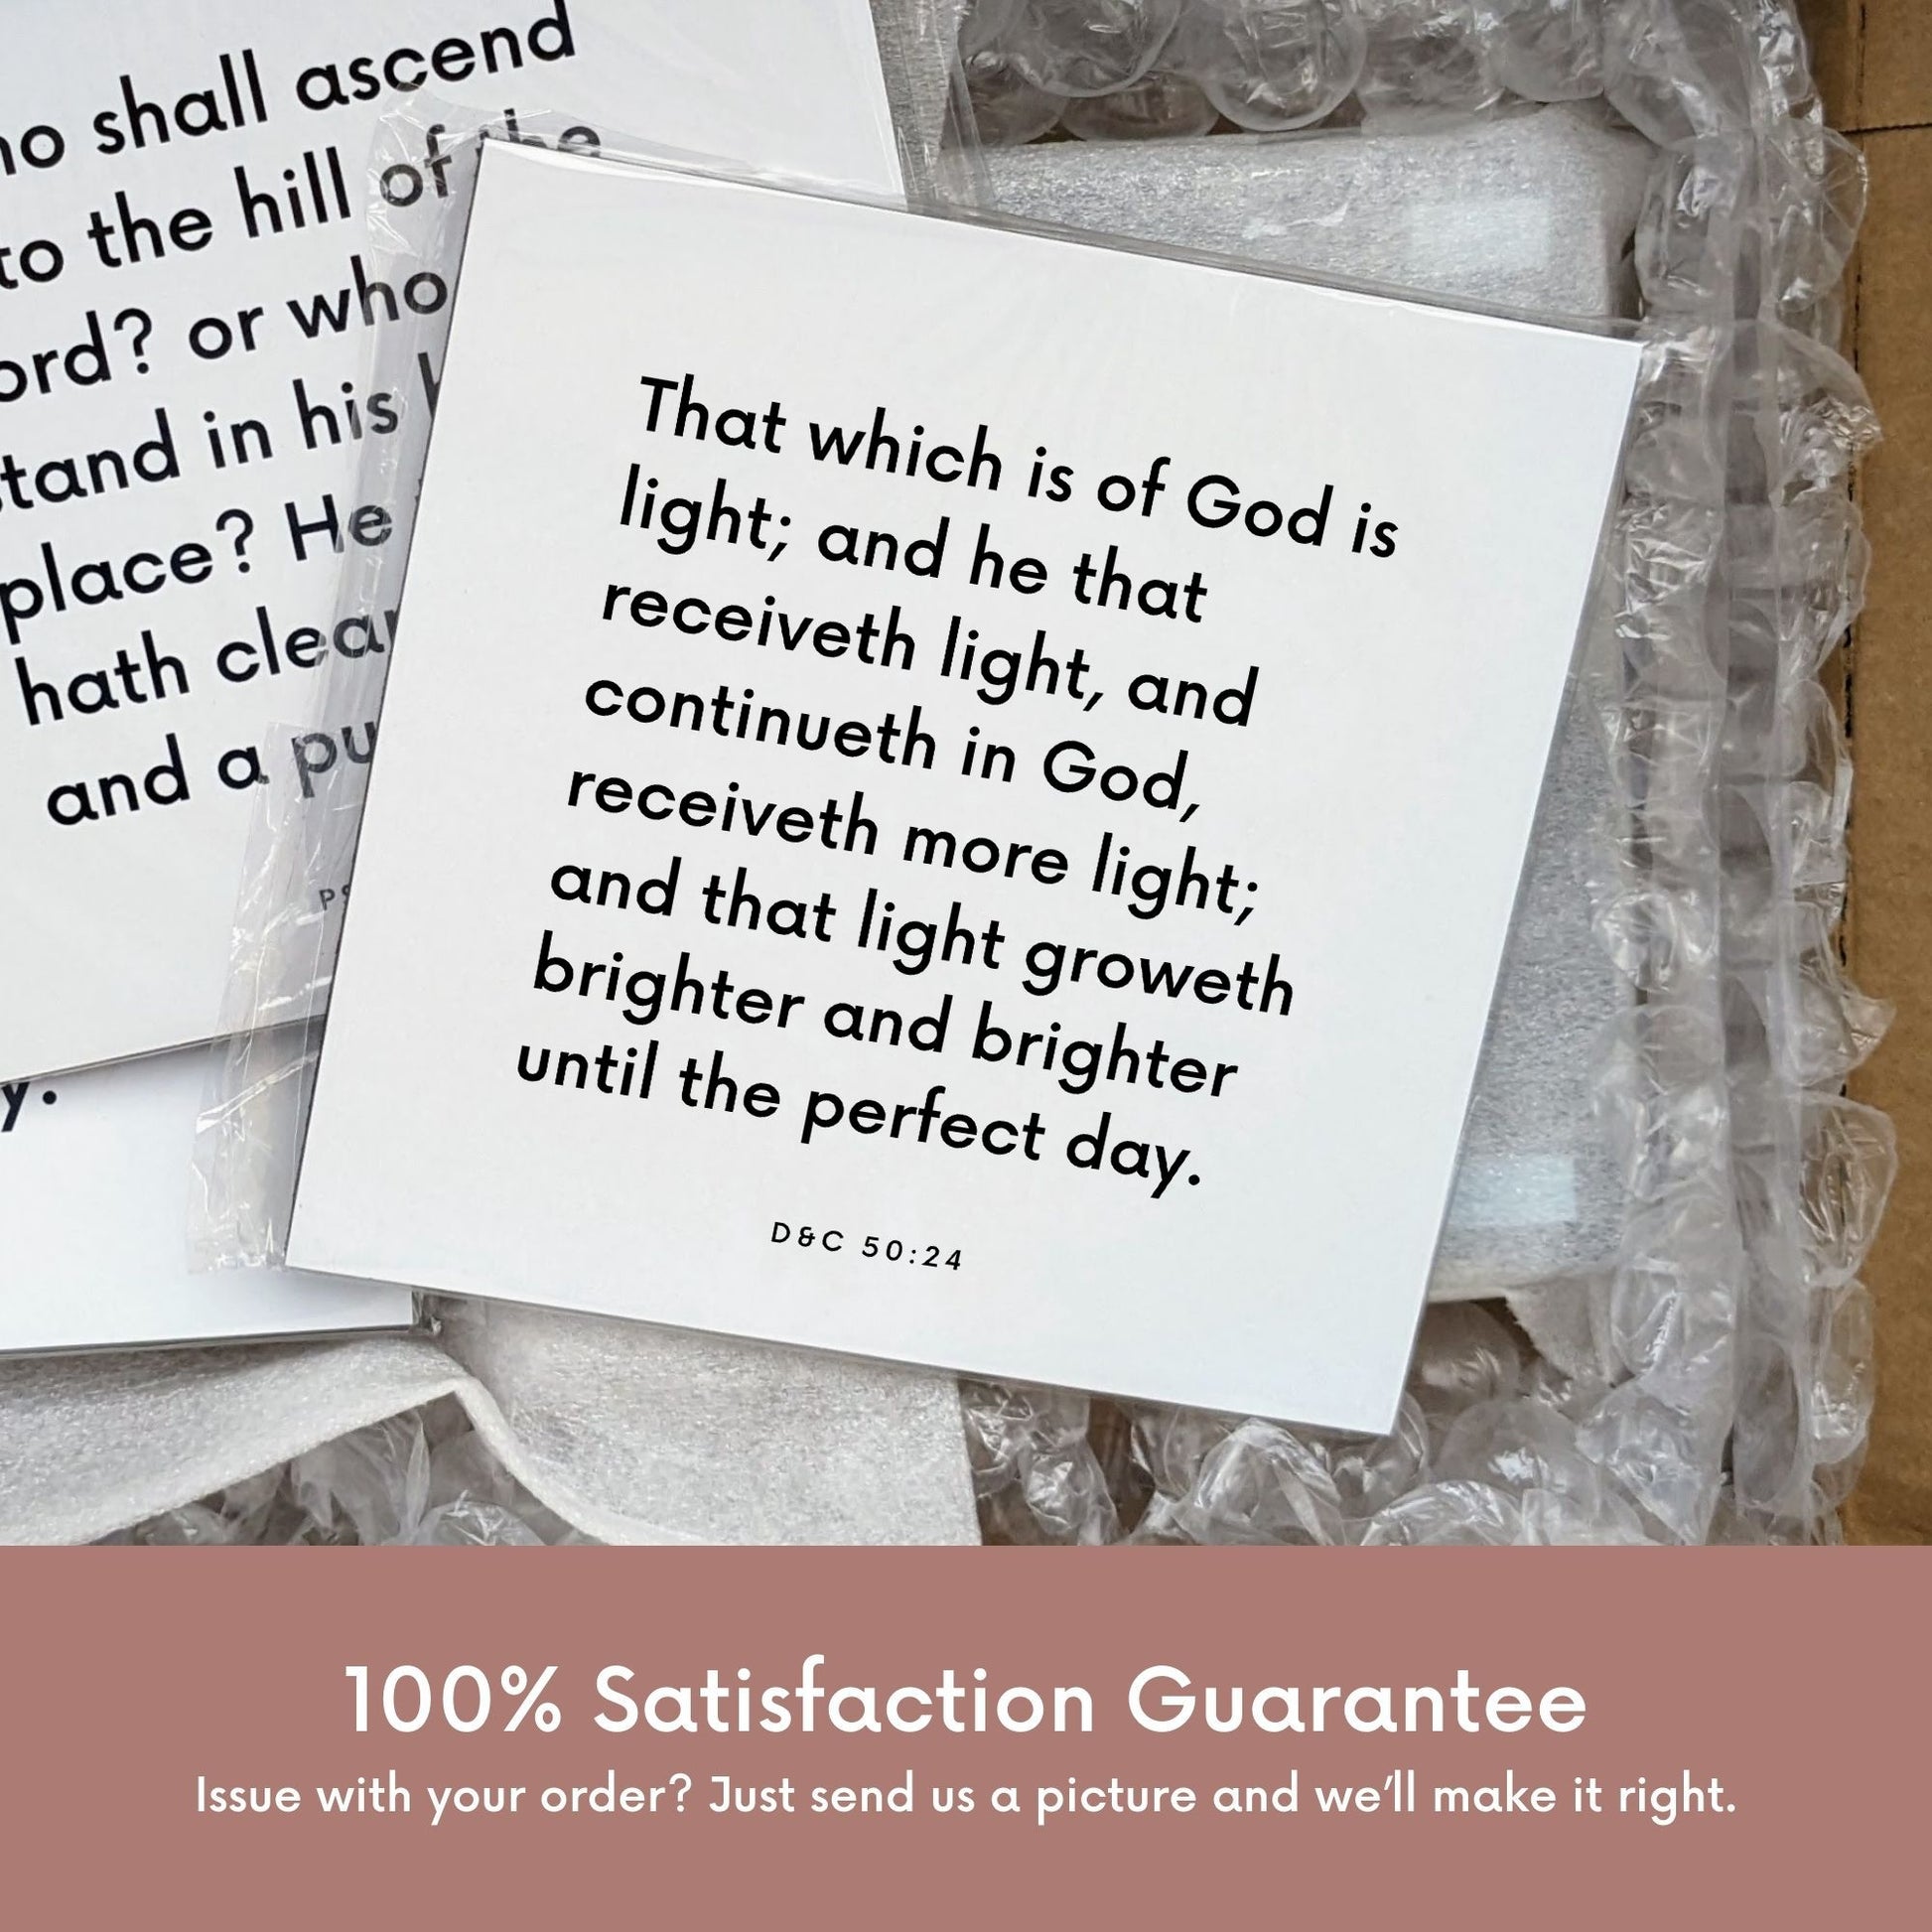 Shipping materials for scripture tile of D&C 50:24 - "That which is of God is light"